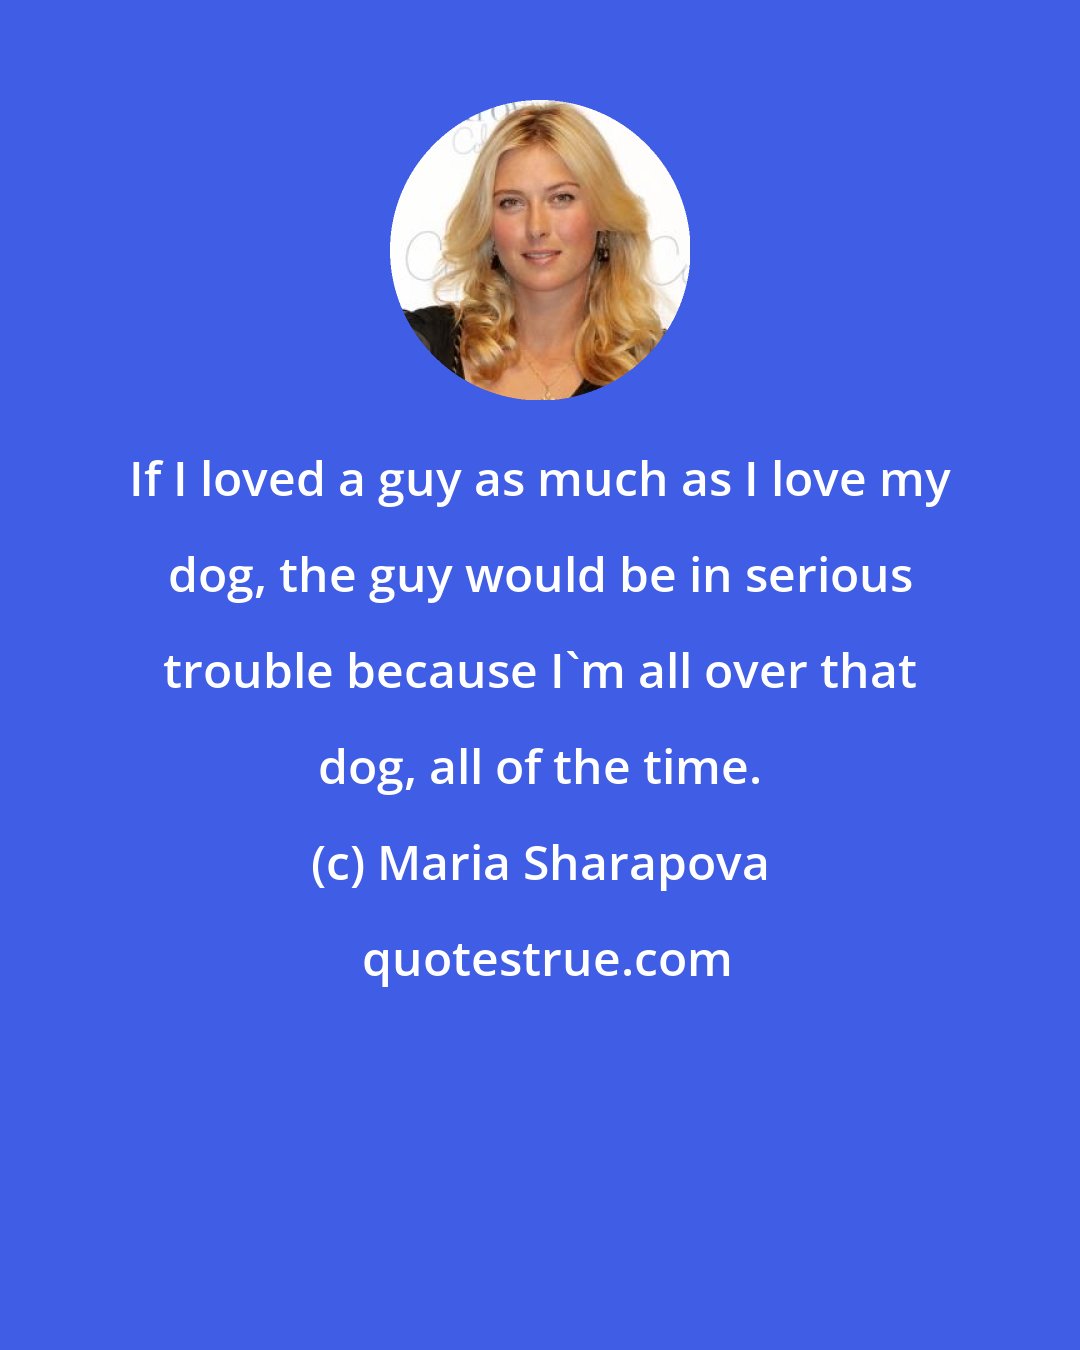 Maria Sharapova: If I loved a guy as much as I love my dog, the guy would be in serious trouble because I'm all over that dog, all of the time.